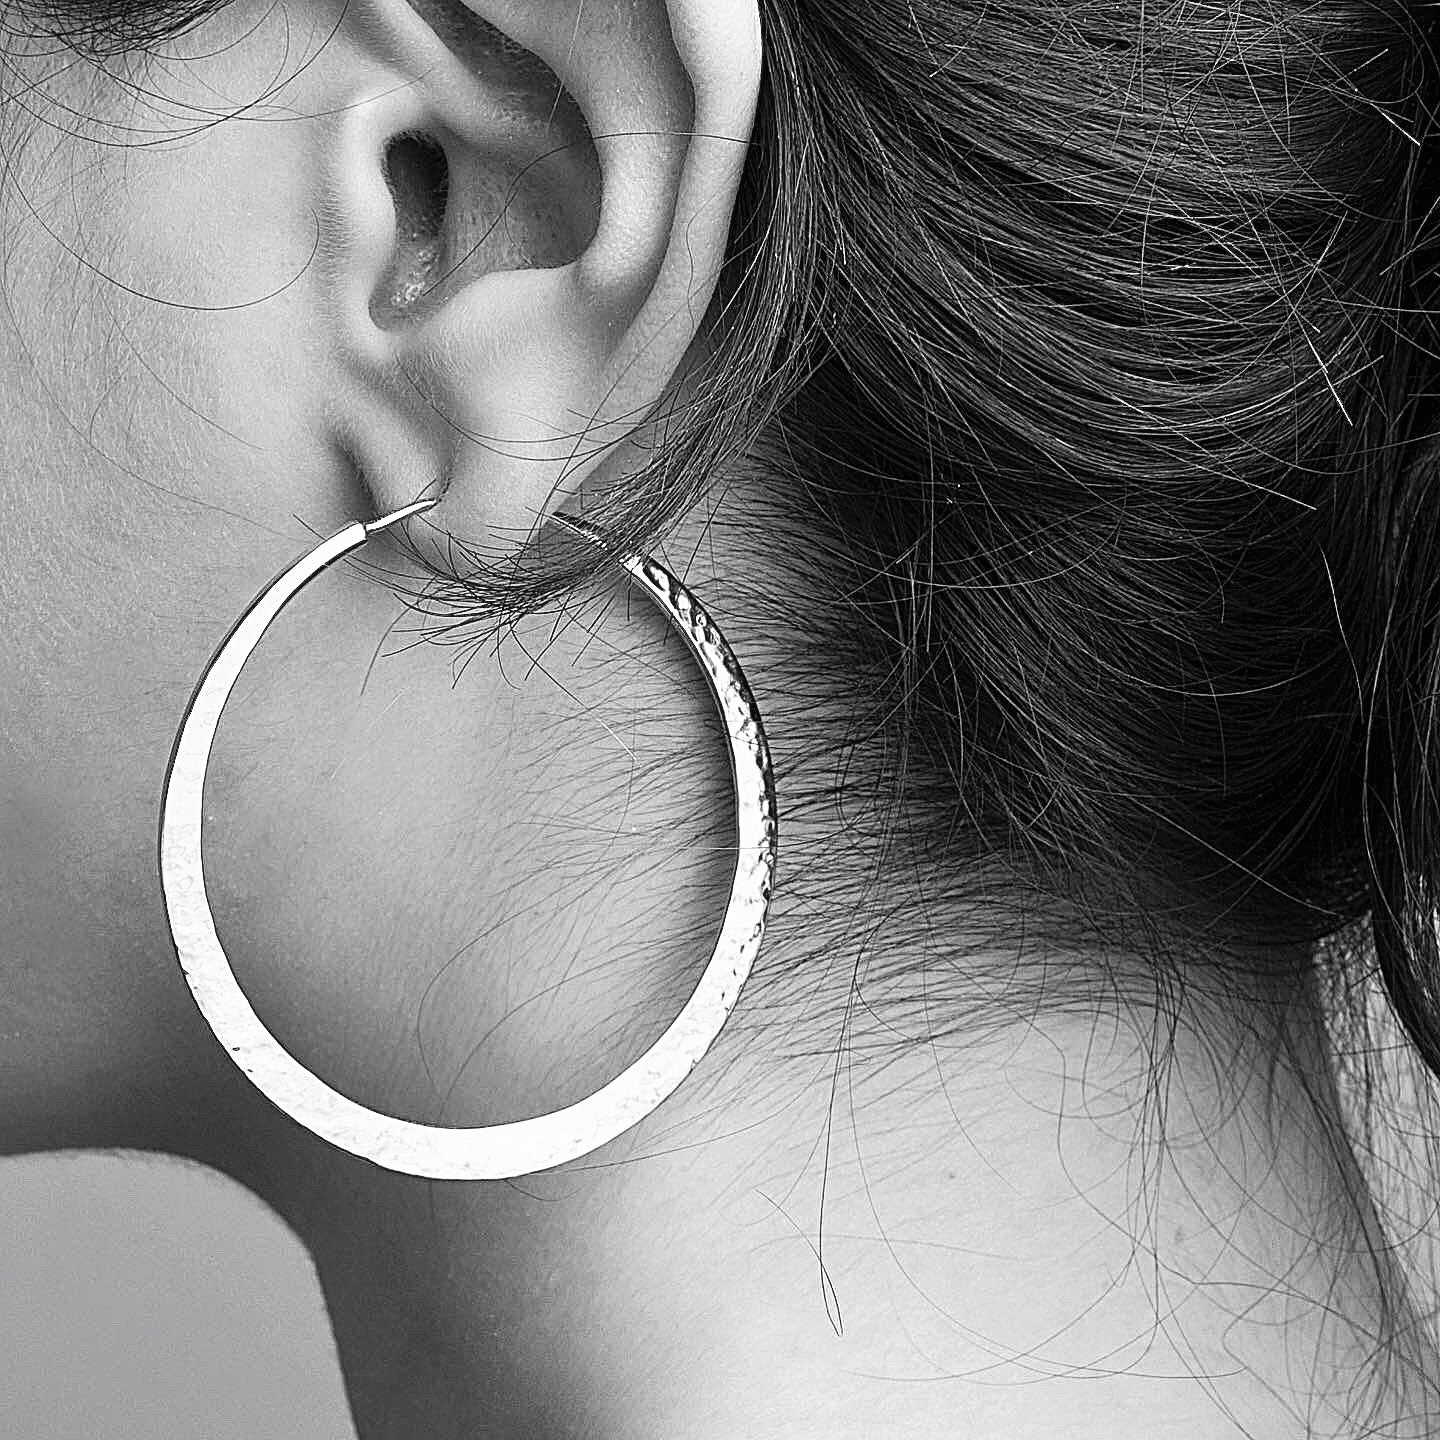 Forged Hoops Large, Silver